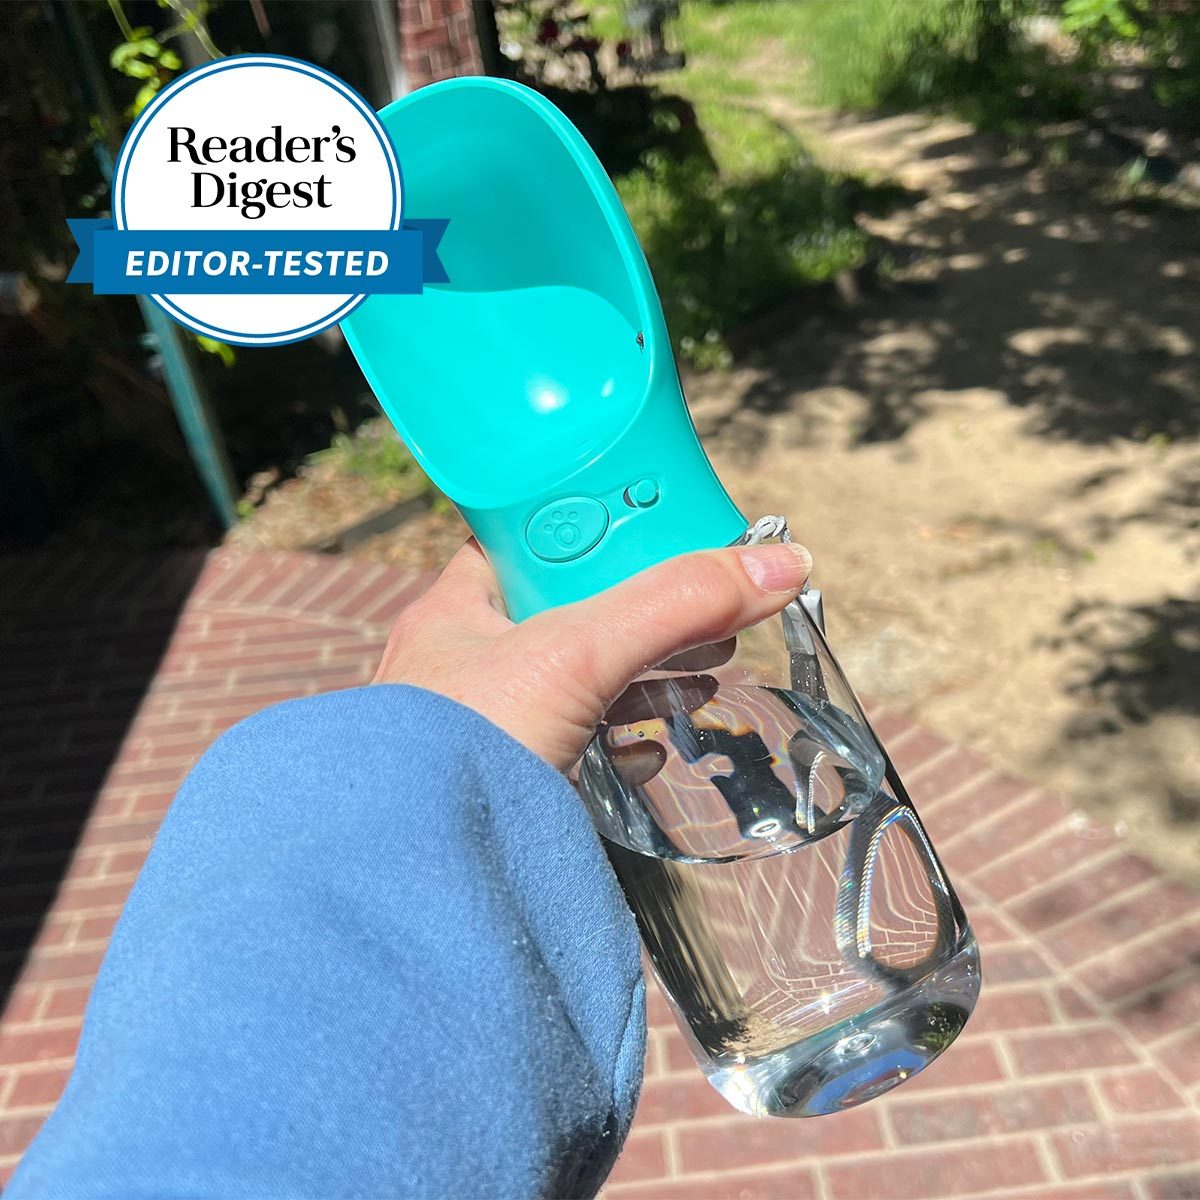 Lesotc Dog Water Bottle portable pet bowl keeps your pup hydrated on the go  » Gadget Flow